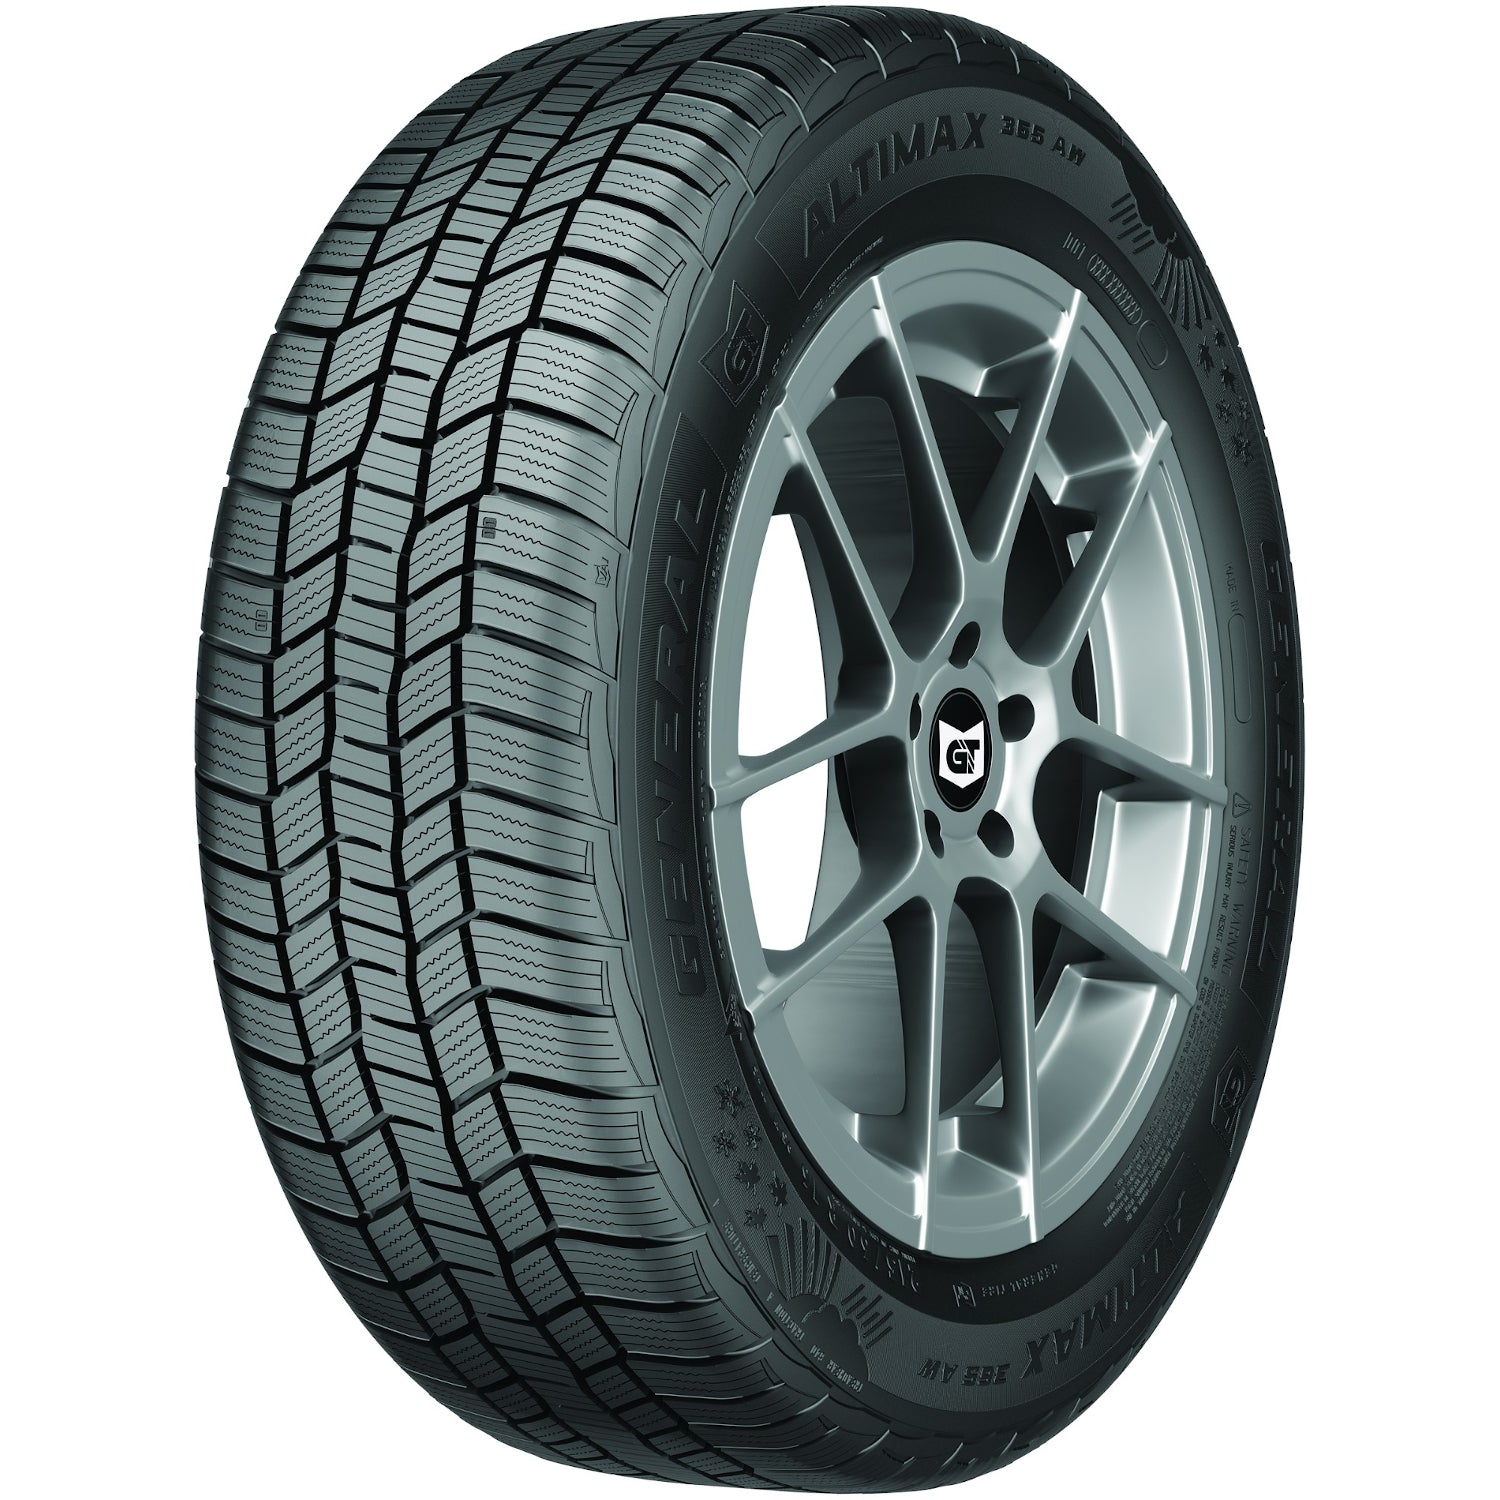 GENERAL ALTIMAX 365AW 225/40R18 (25.1X8.9R 18) Tires